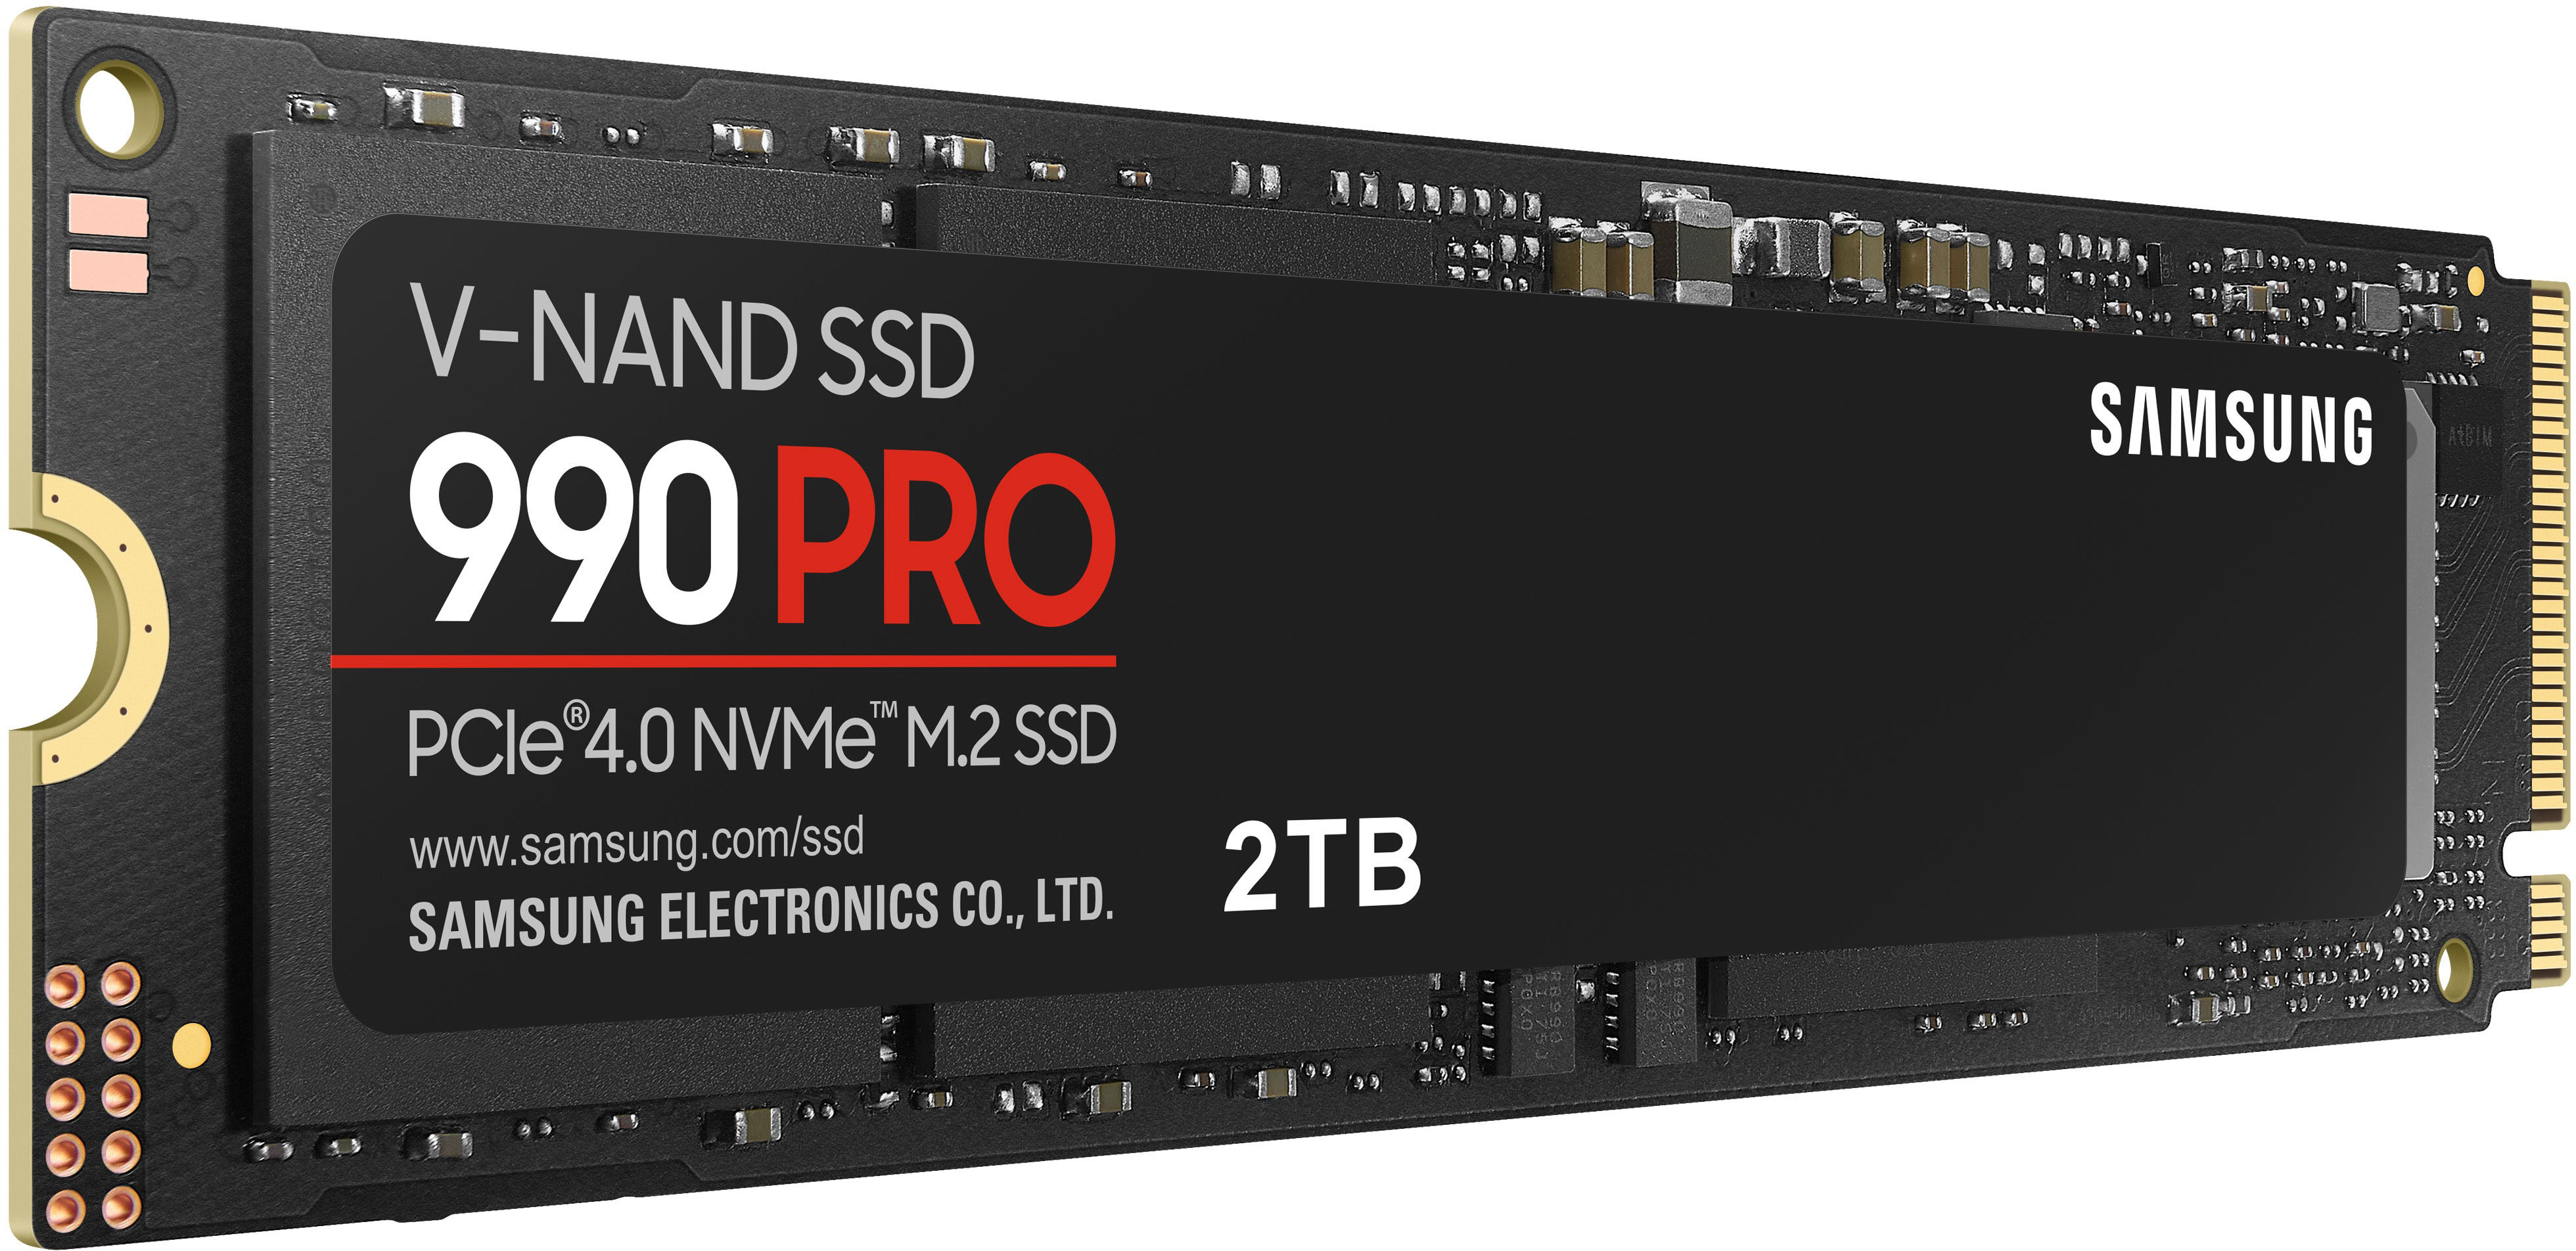 Samsung 990 PRO SSD is now available for preorder - Neowin